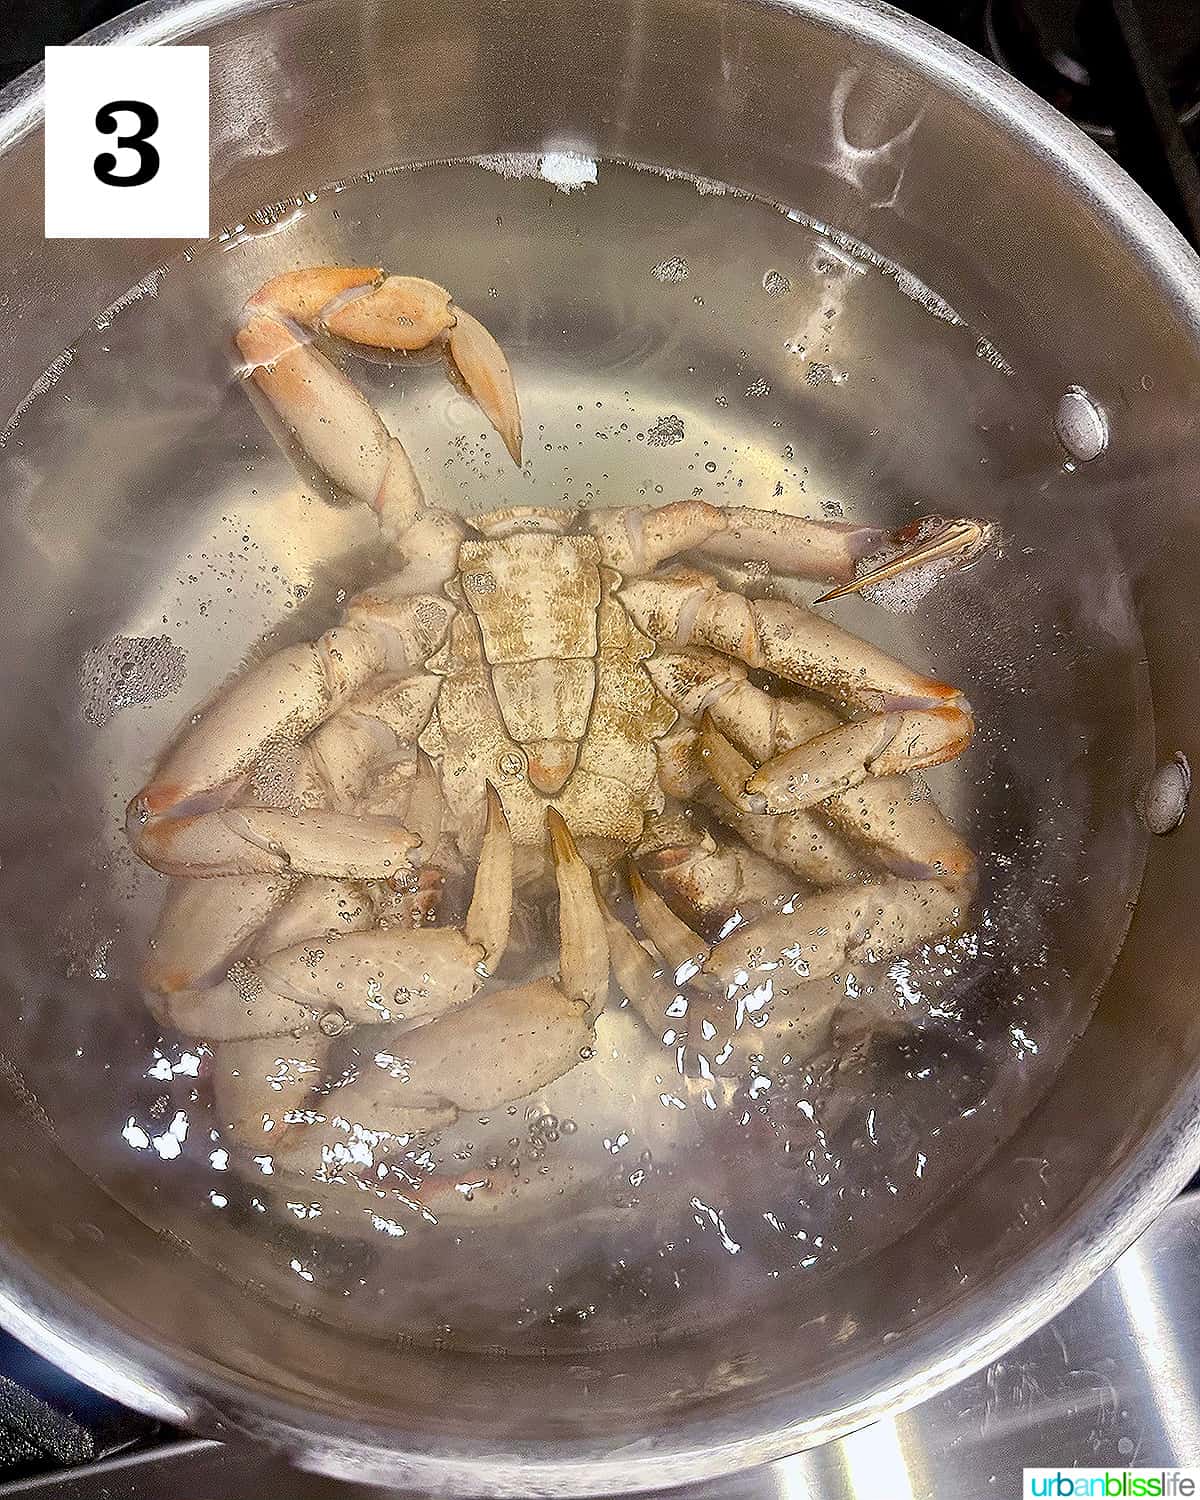 Dungeness crab boiling in a large pot of water.